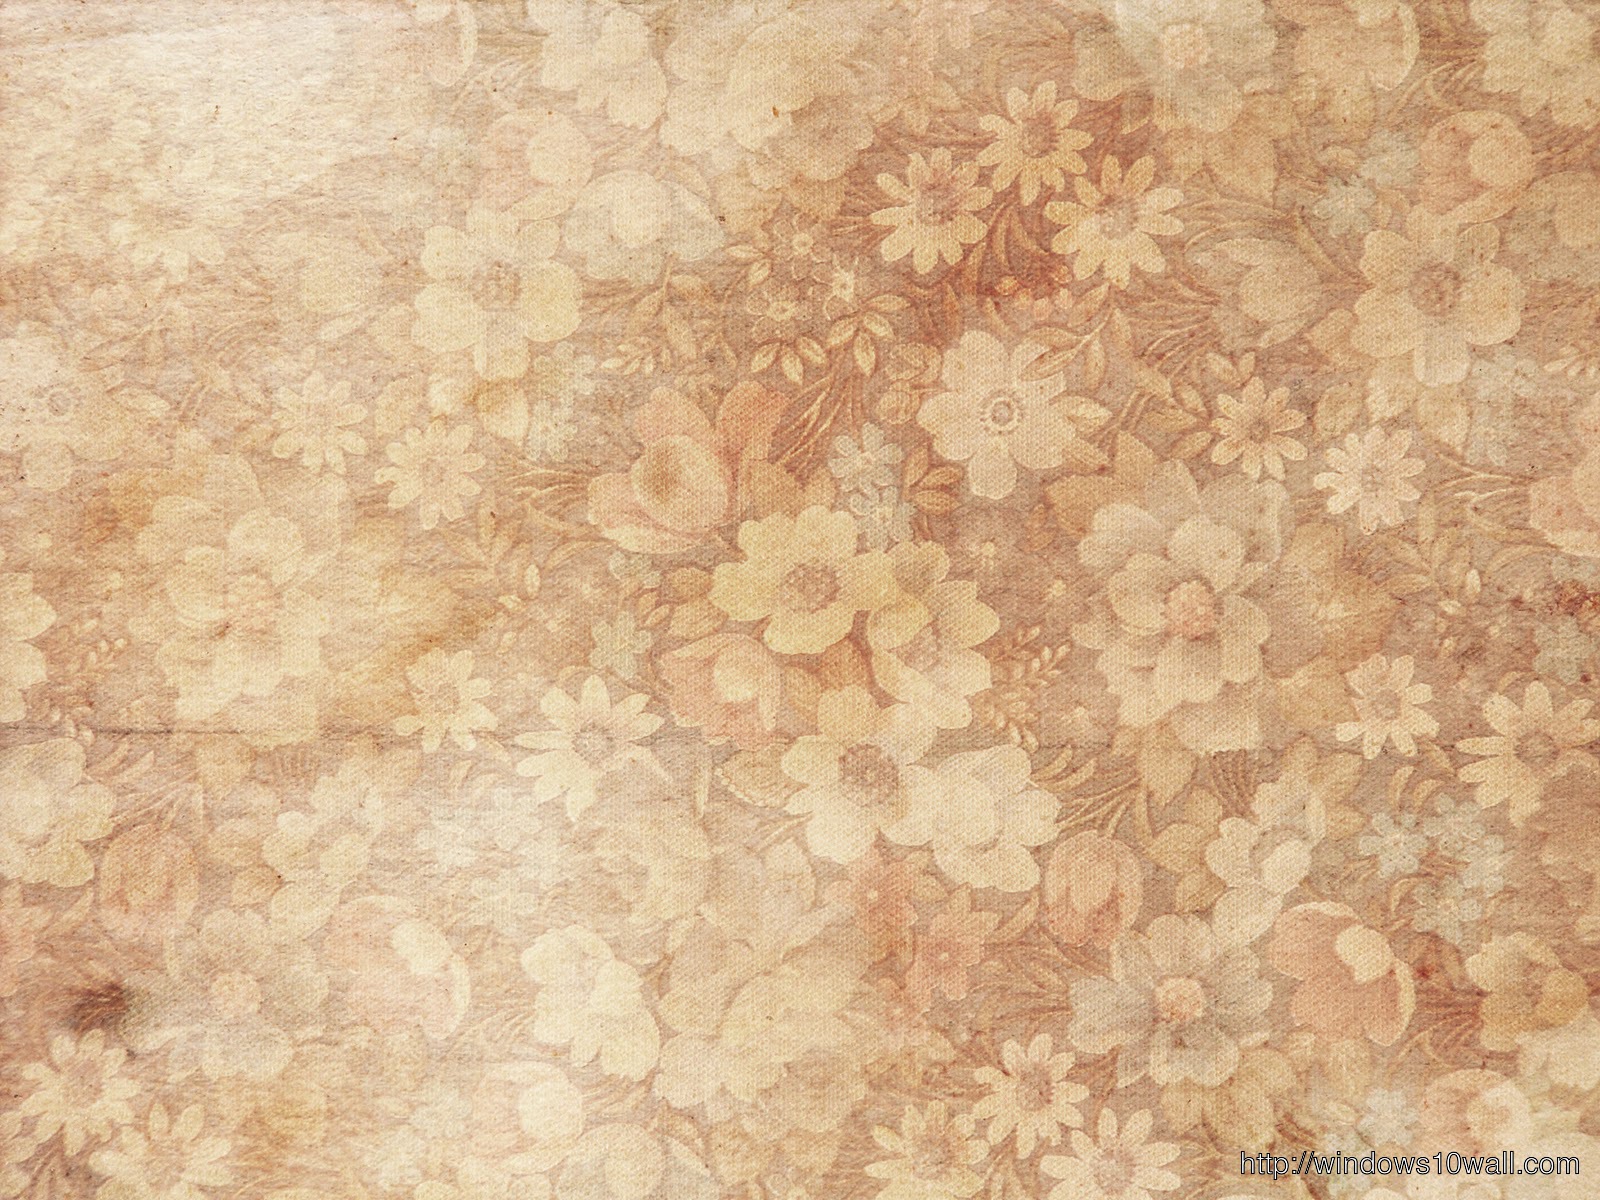 Texture Download: Floral background texture download free HD